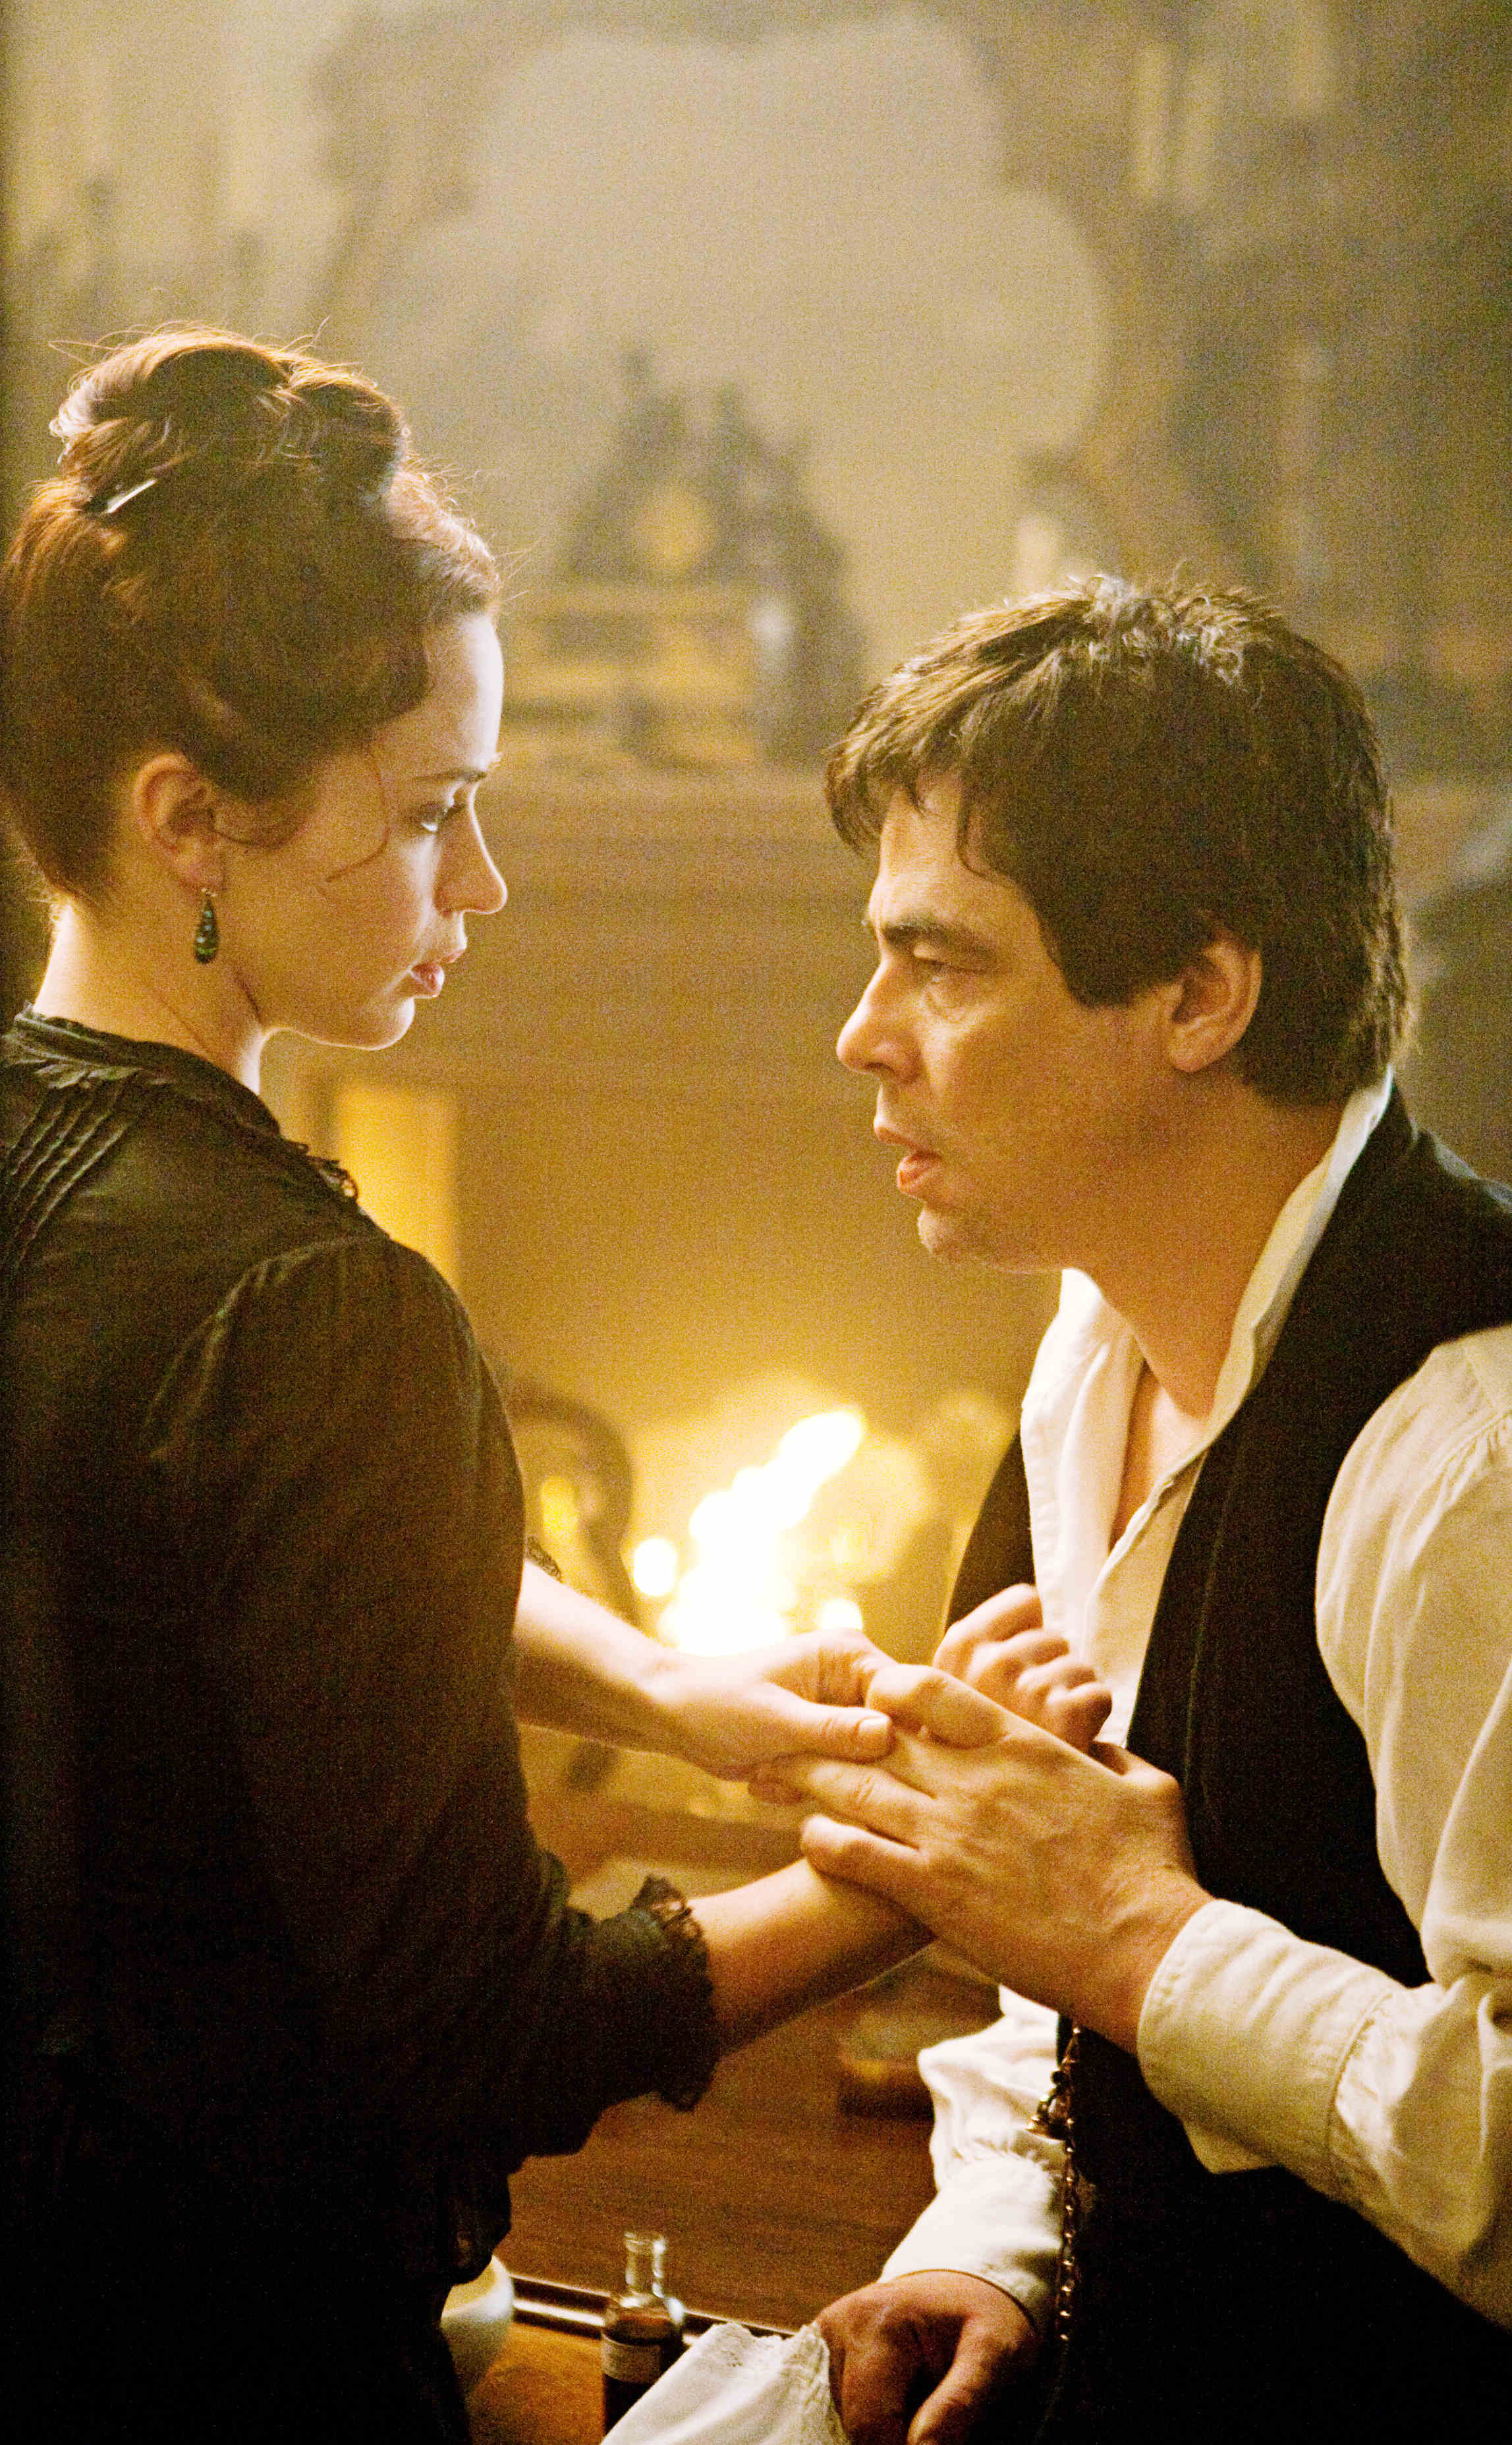 Emily Blunt stars as Gwen Conliffe and Benicio Del Toro stars as Lawrence Talbot in Universal Pictures' The Wolfman (2009)